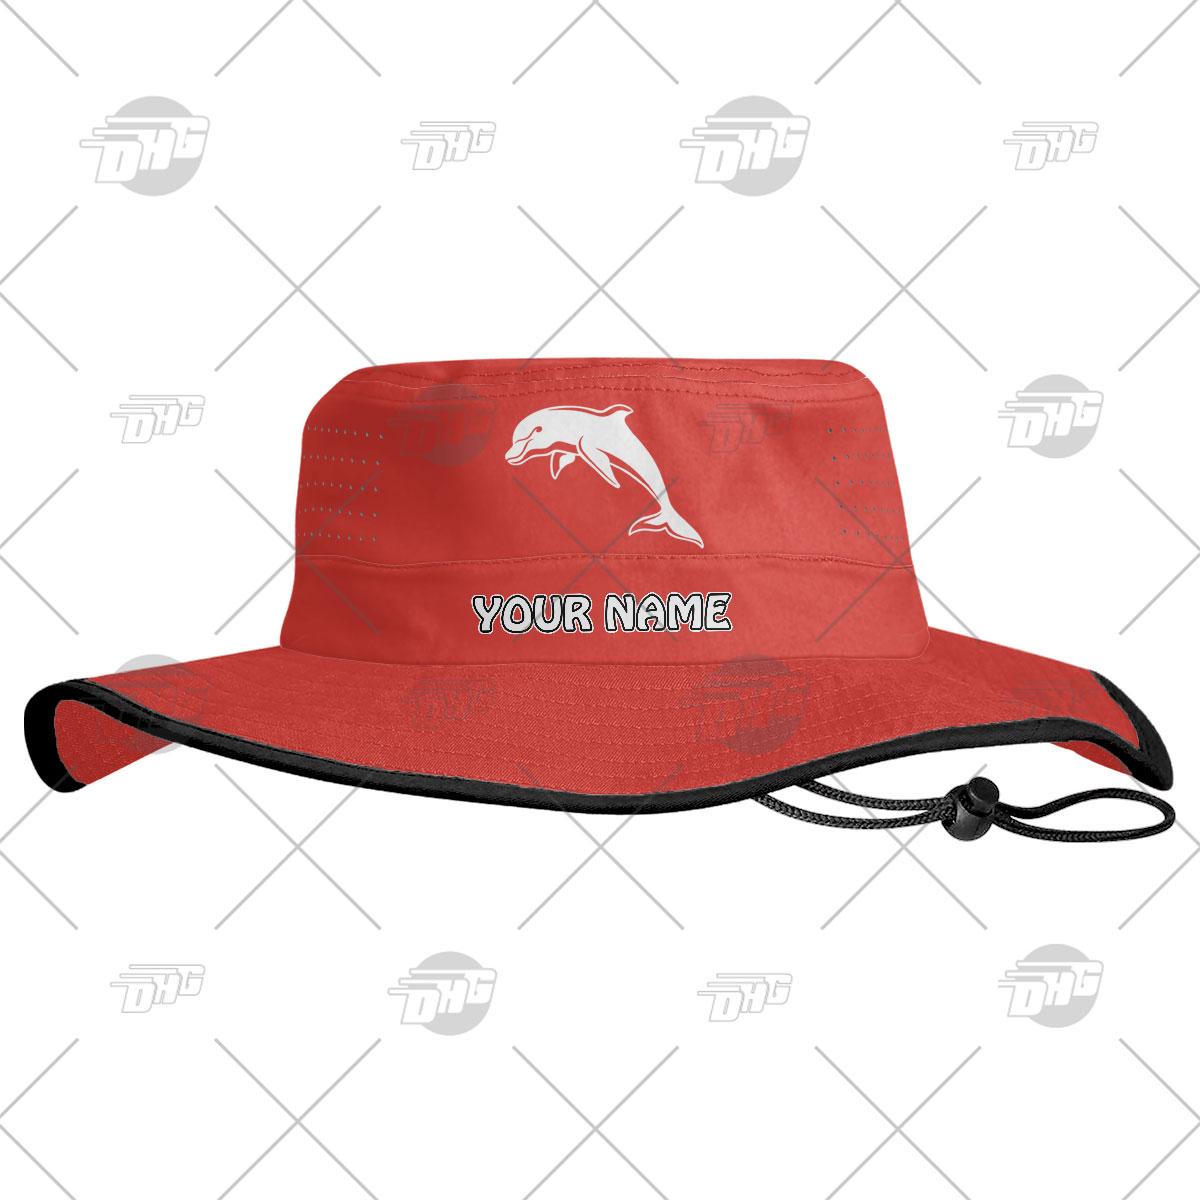 Personalised NRL Dolphins bucket hat boonie hat - OldSchoolThings -  Personalize Your Own New & Retro Sports Jerseys, Hoodies, T Shirts